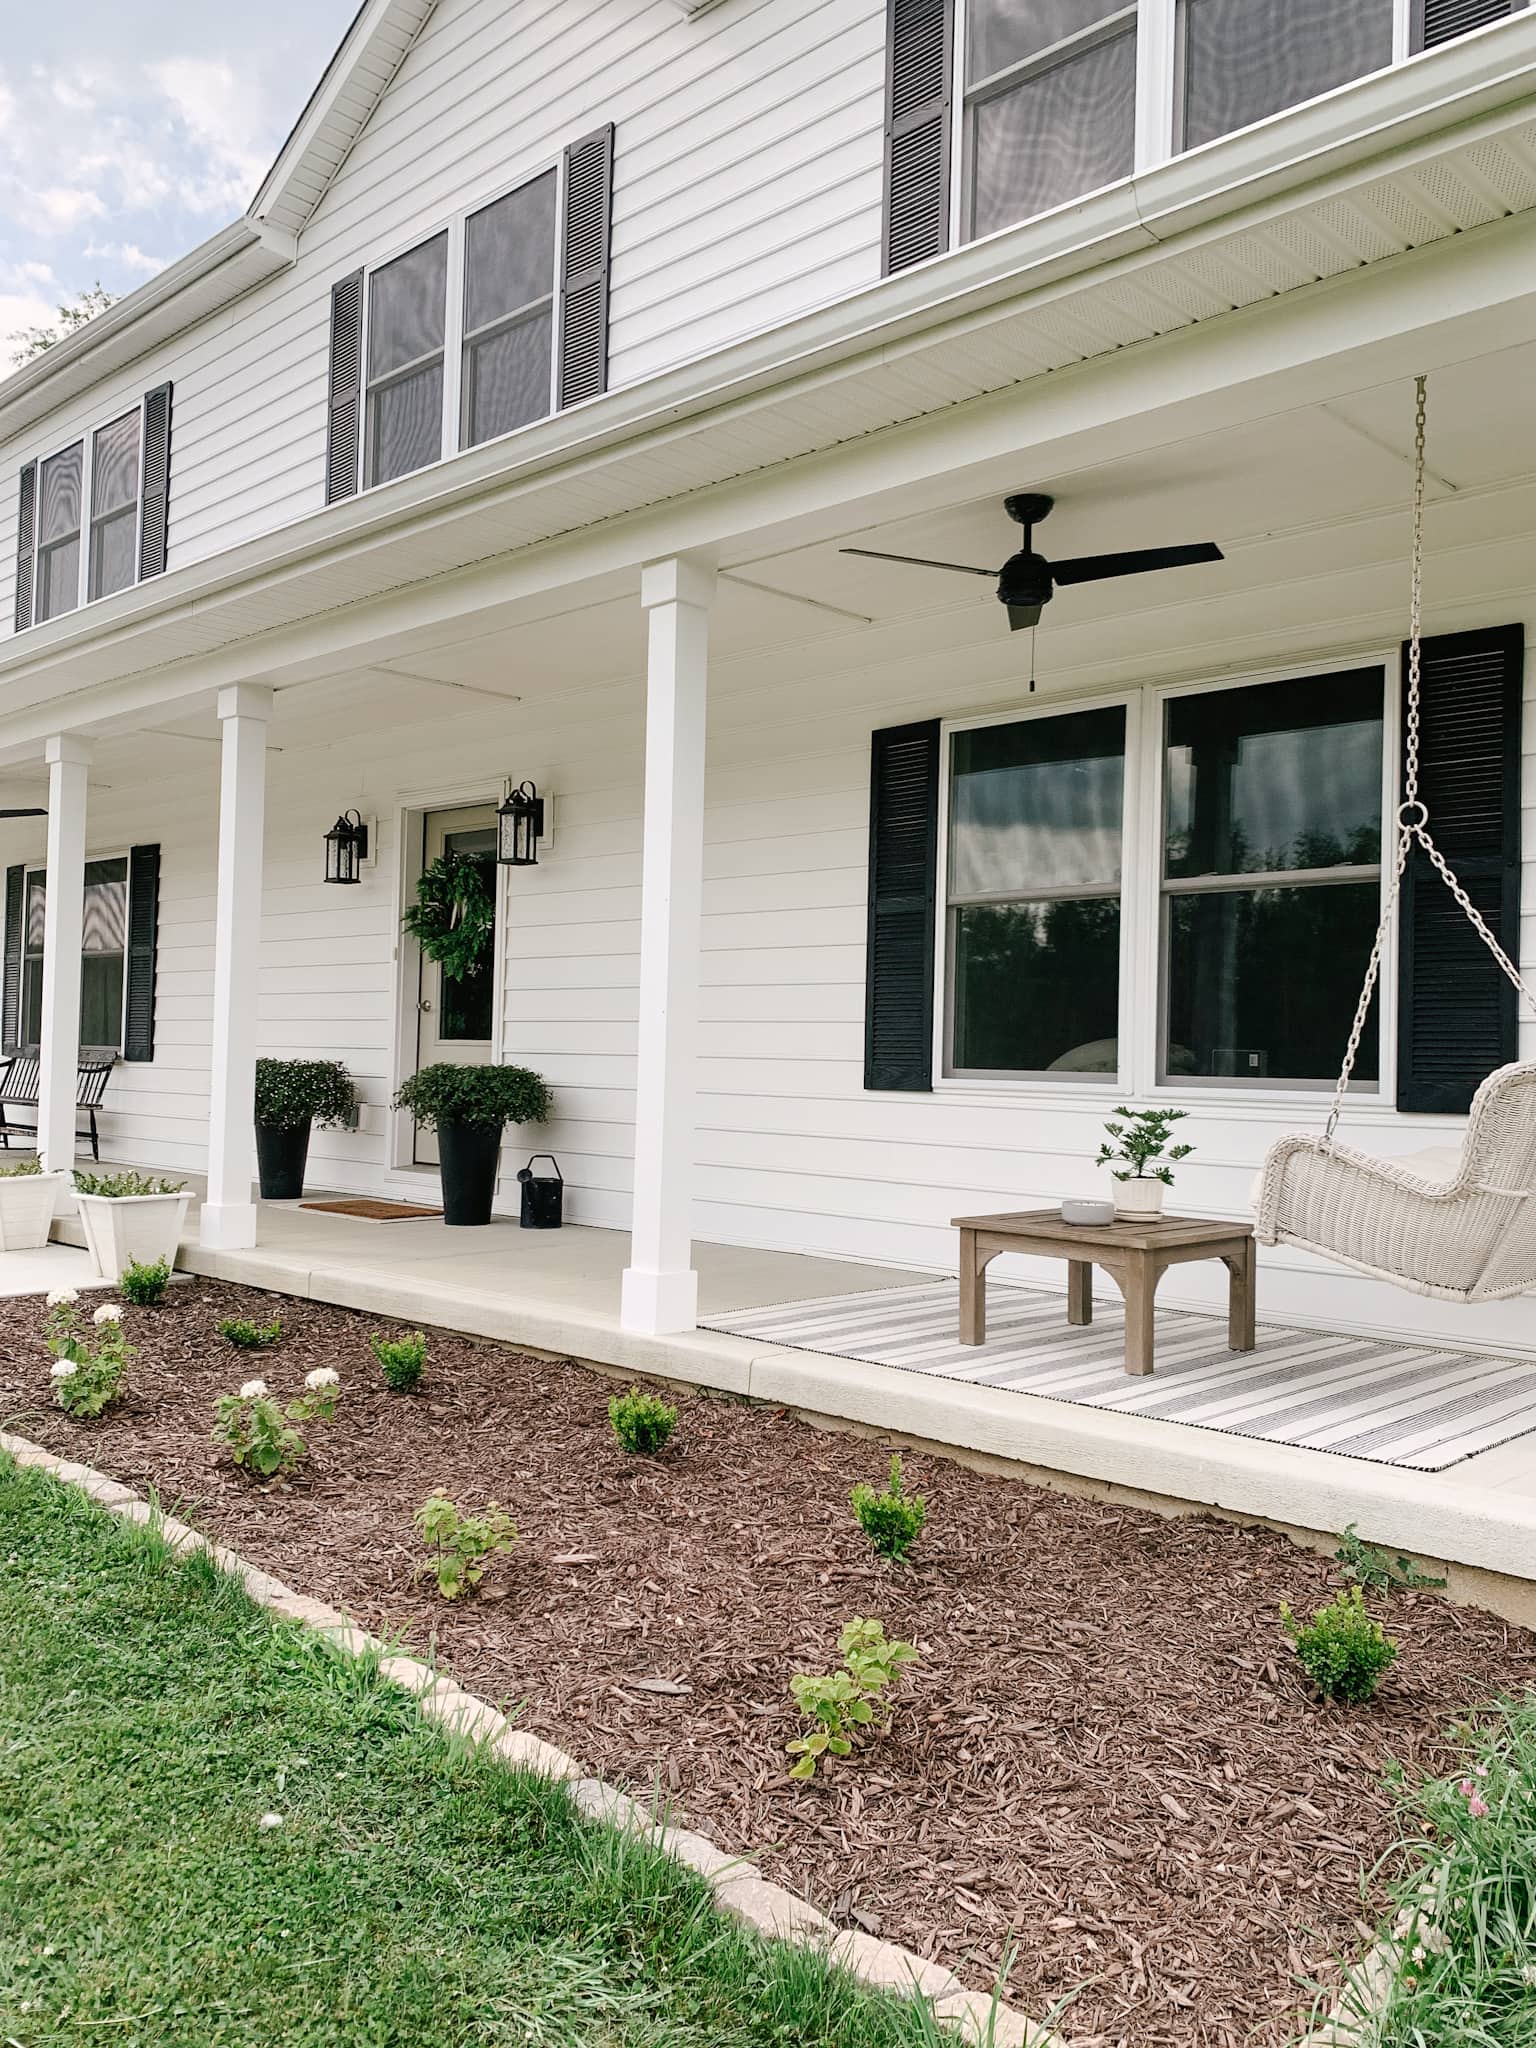 How to Update Simple Porch Columns